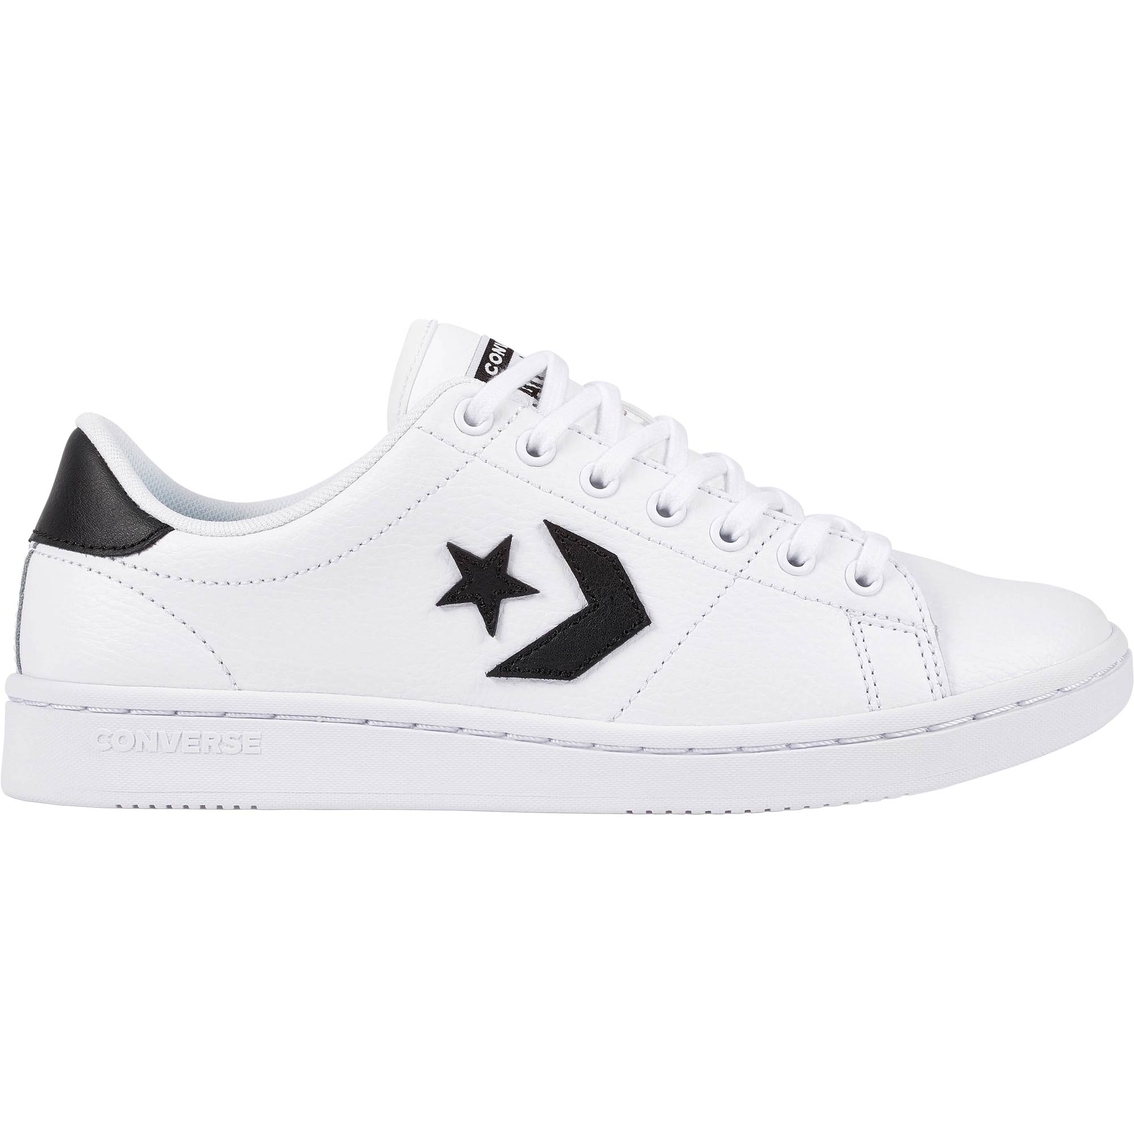 converse all court trainers